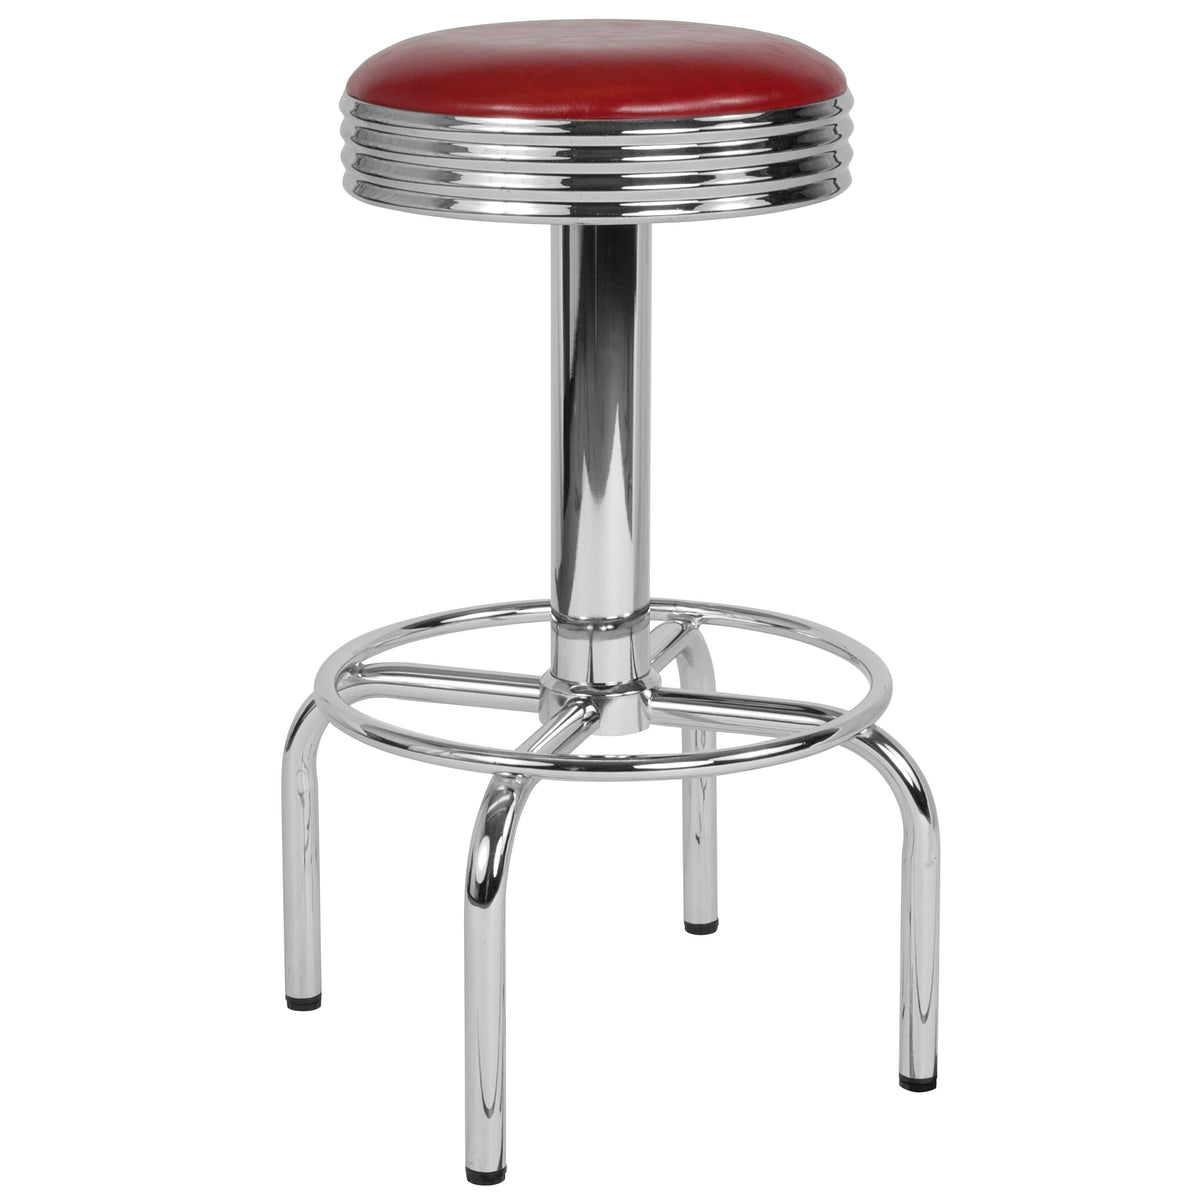 Red |#| Retro Diner Barstool with Chrome Base in Red Vinyl - Metal Vintage Barstool